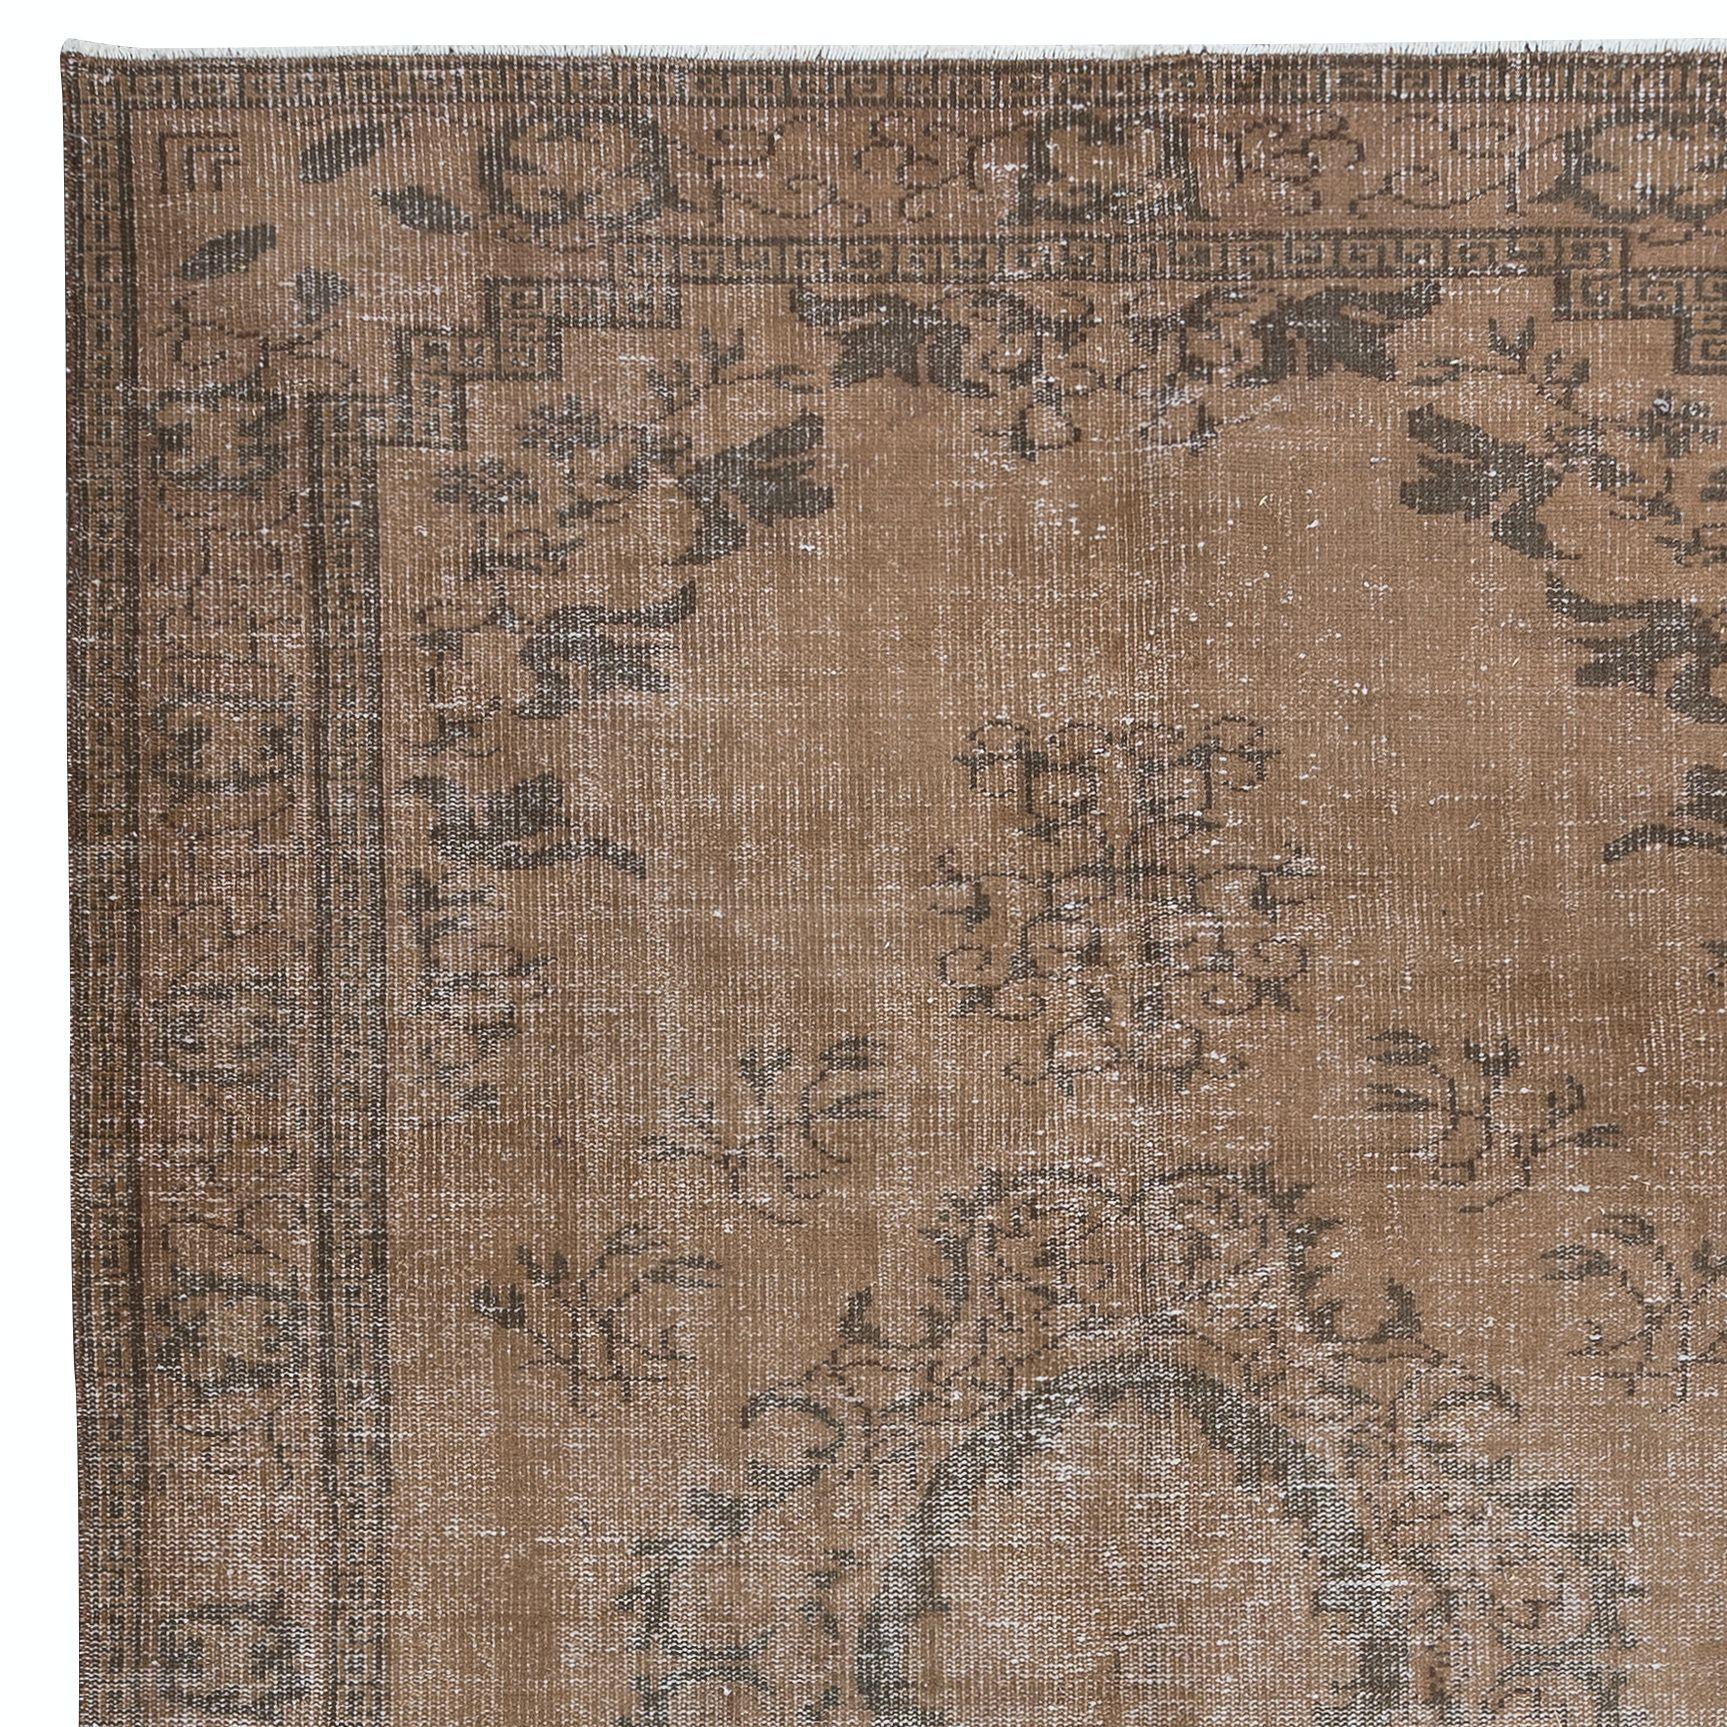 Hand-Knotted 5.8x9 Ft Modern Brown Handmade Area Rug, Contemporary Turkish Wool Carpet For Sale